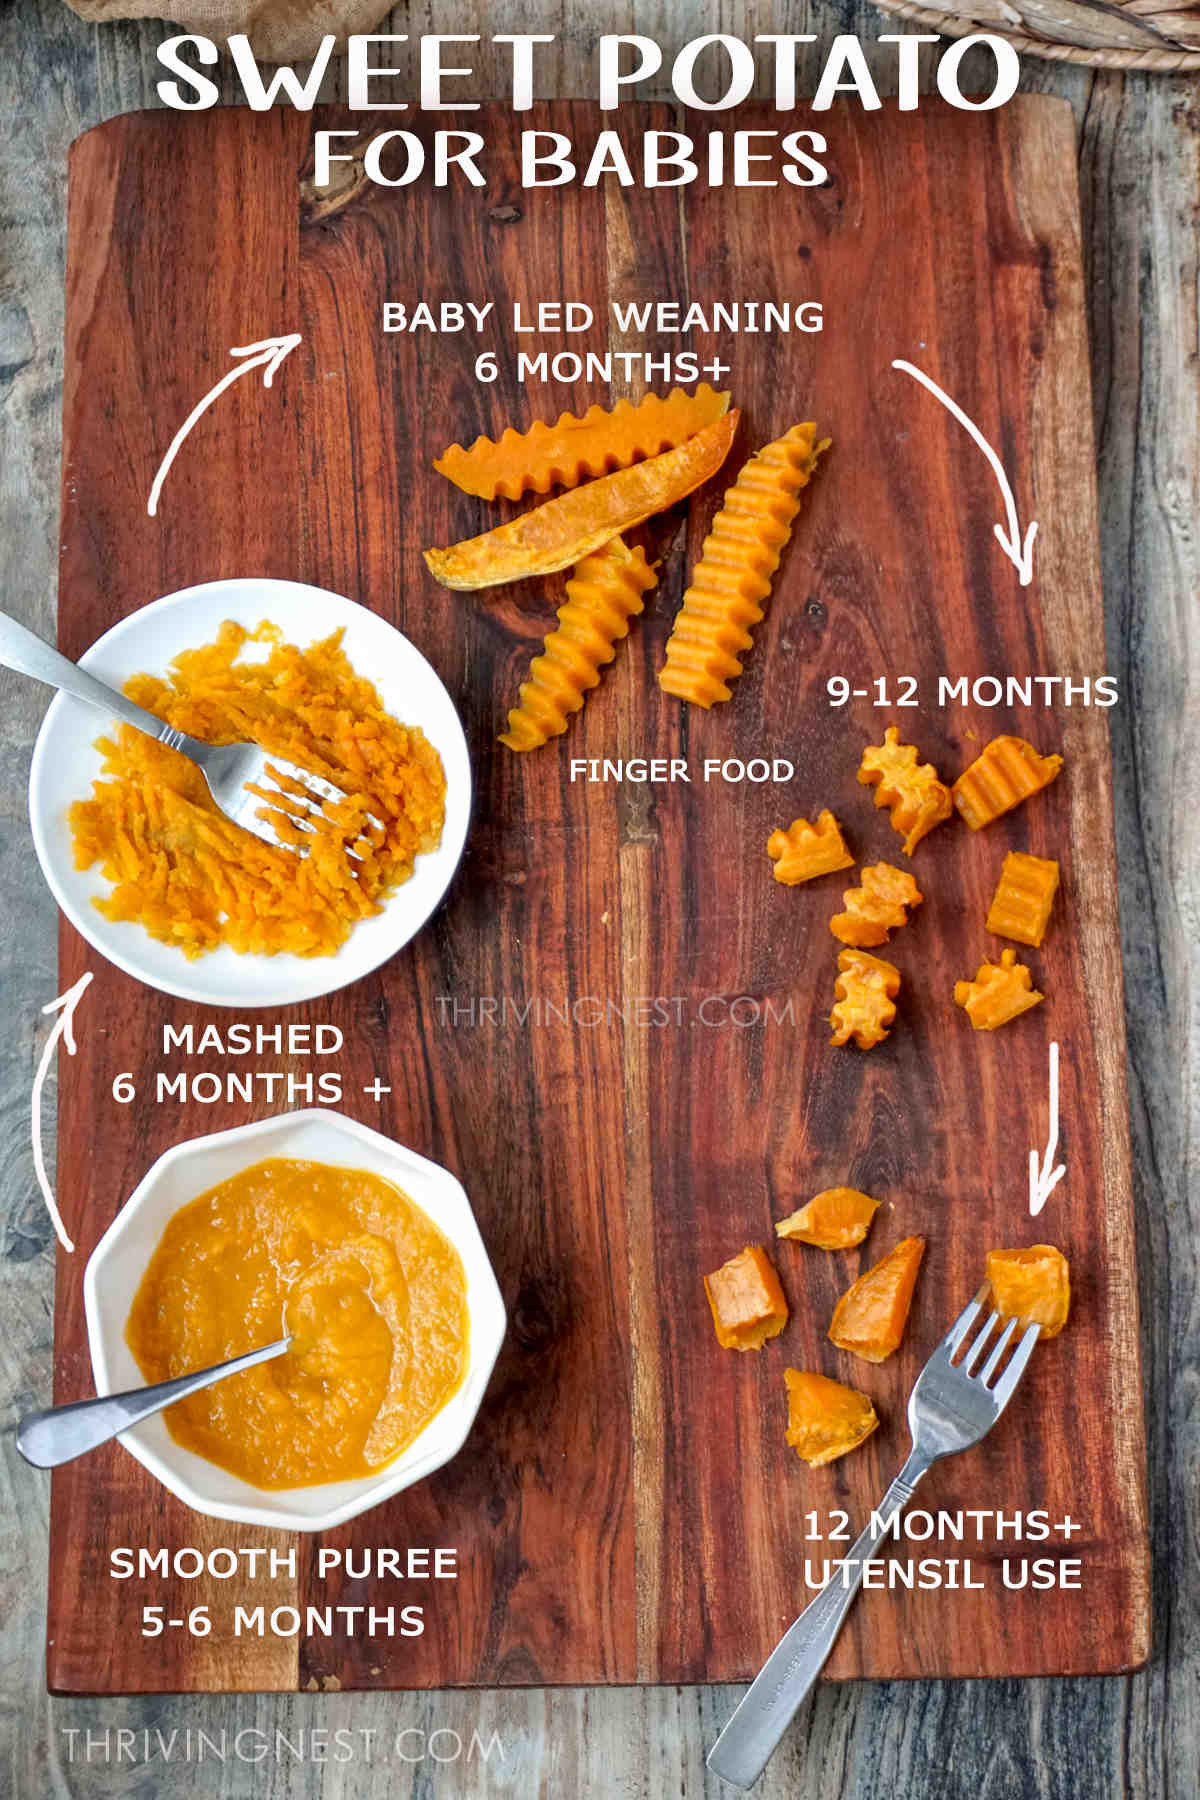 Sweet potato for baby led weaning 6 months plus ways to cook and cut sweet potato for baby.